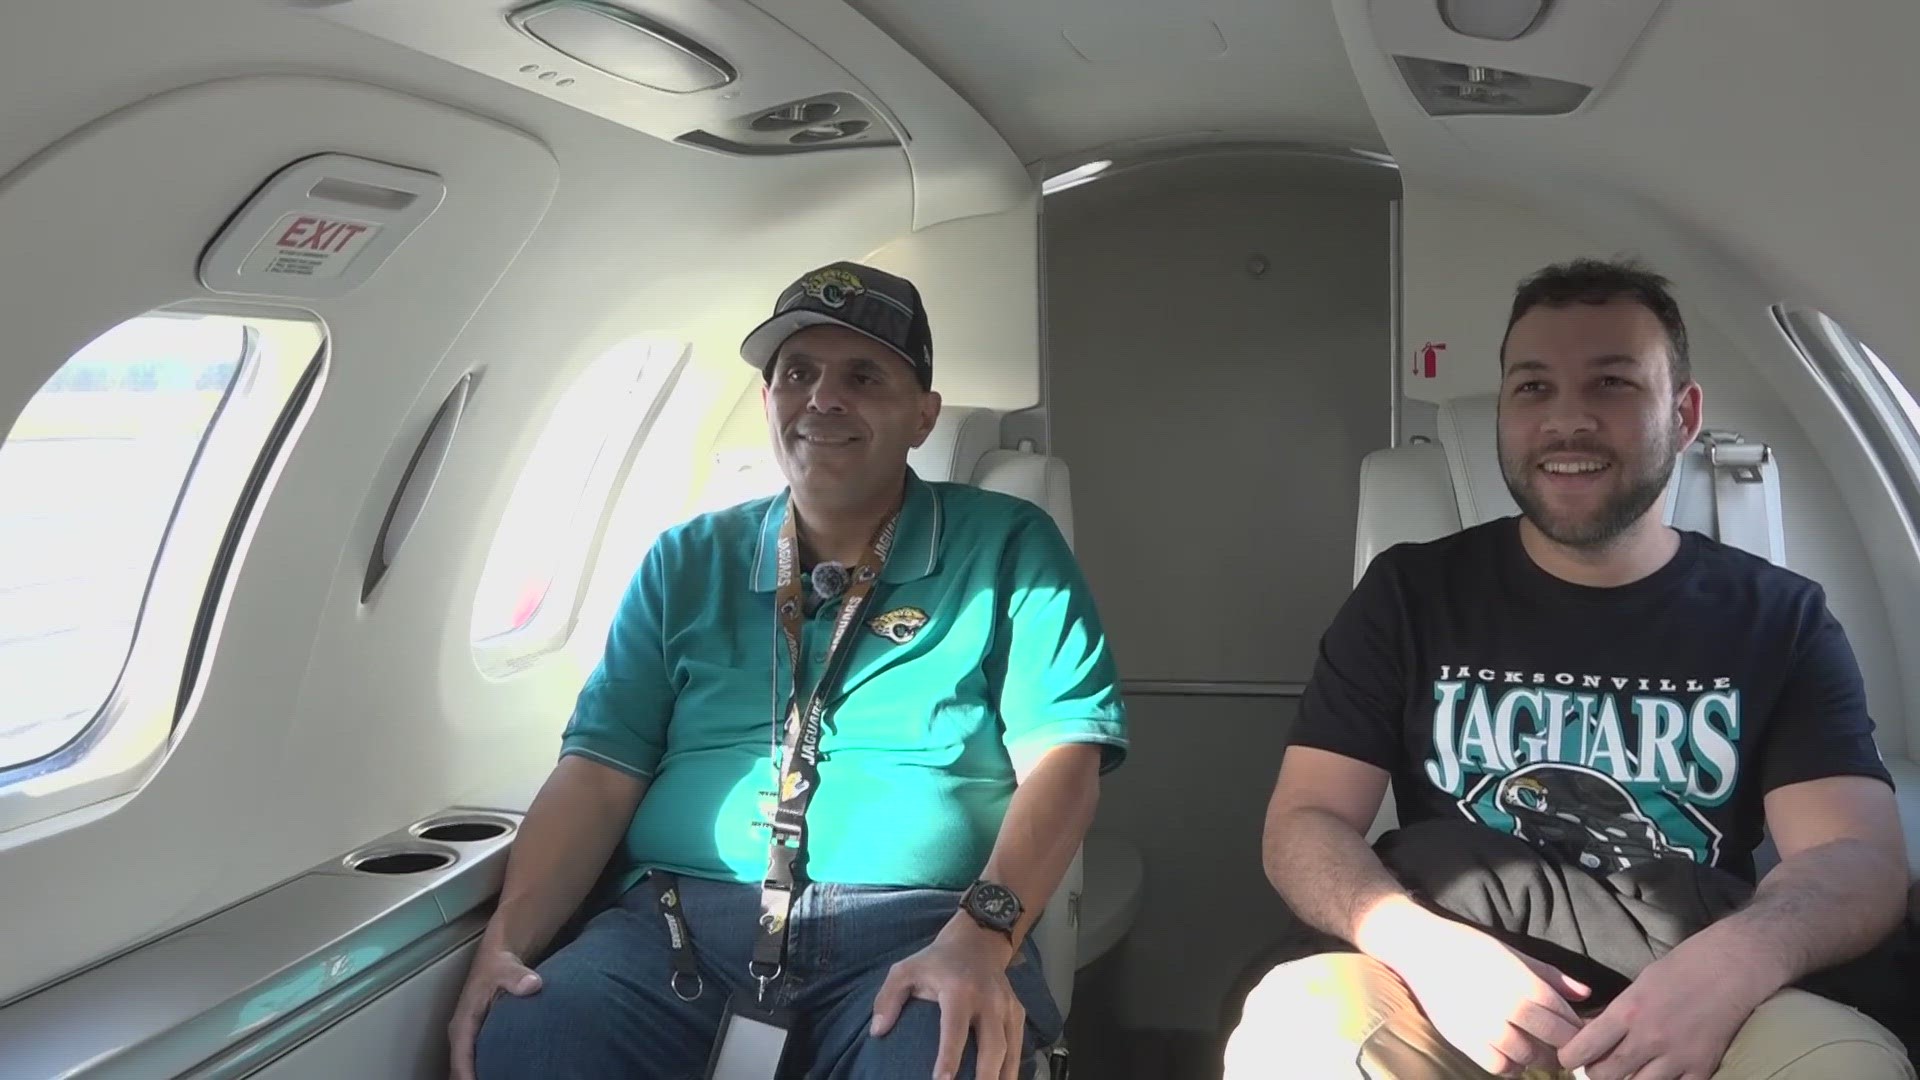 The lucky Jaguars fan won a private flight, tickets and a night in a hotel for the Jaguar's pivotal game against the Tennessee Titans.